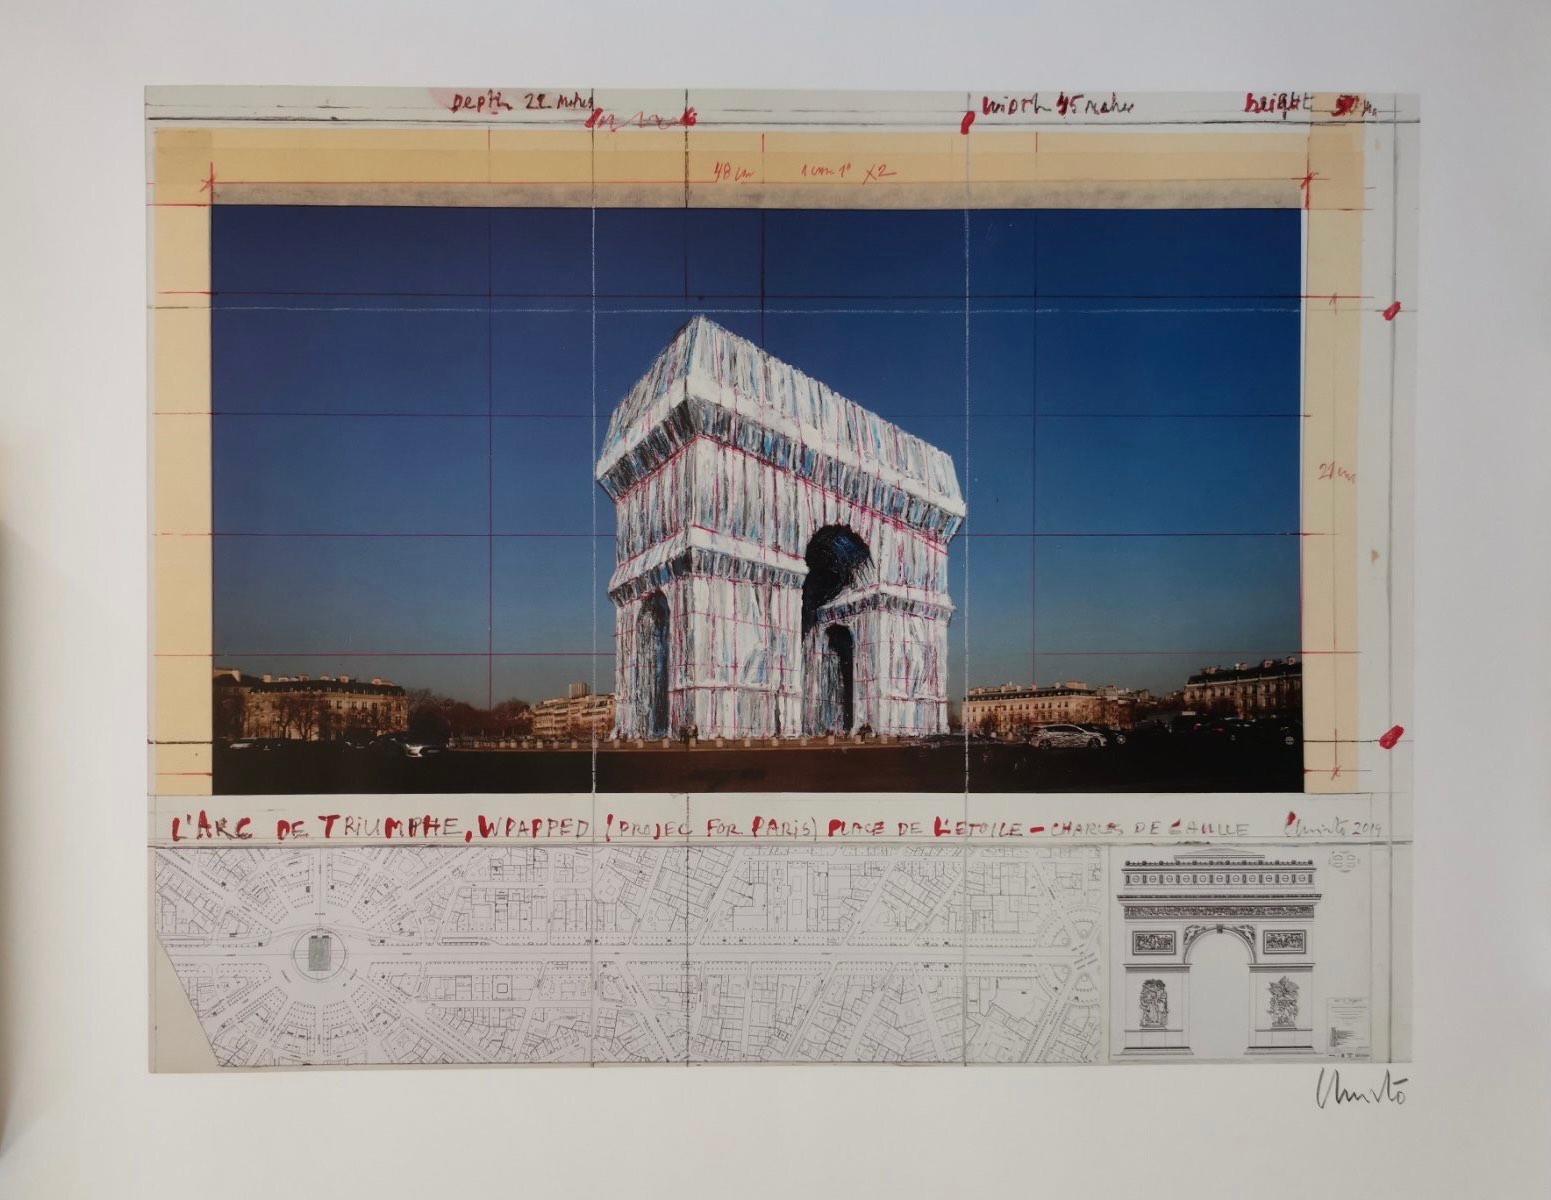 Print of L'Arc de Triomphe wrapped project signed by the artist Christo Javacheff .
Sheet: 62 x 71 cm
USA 2019.